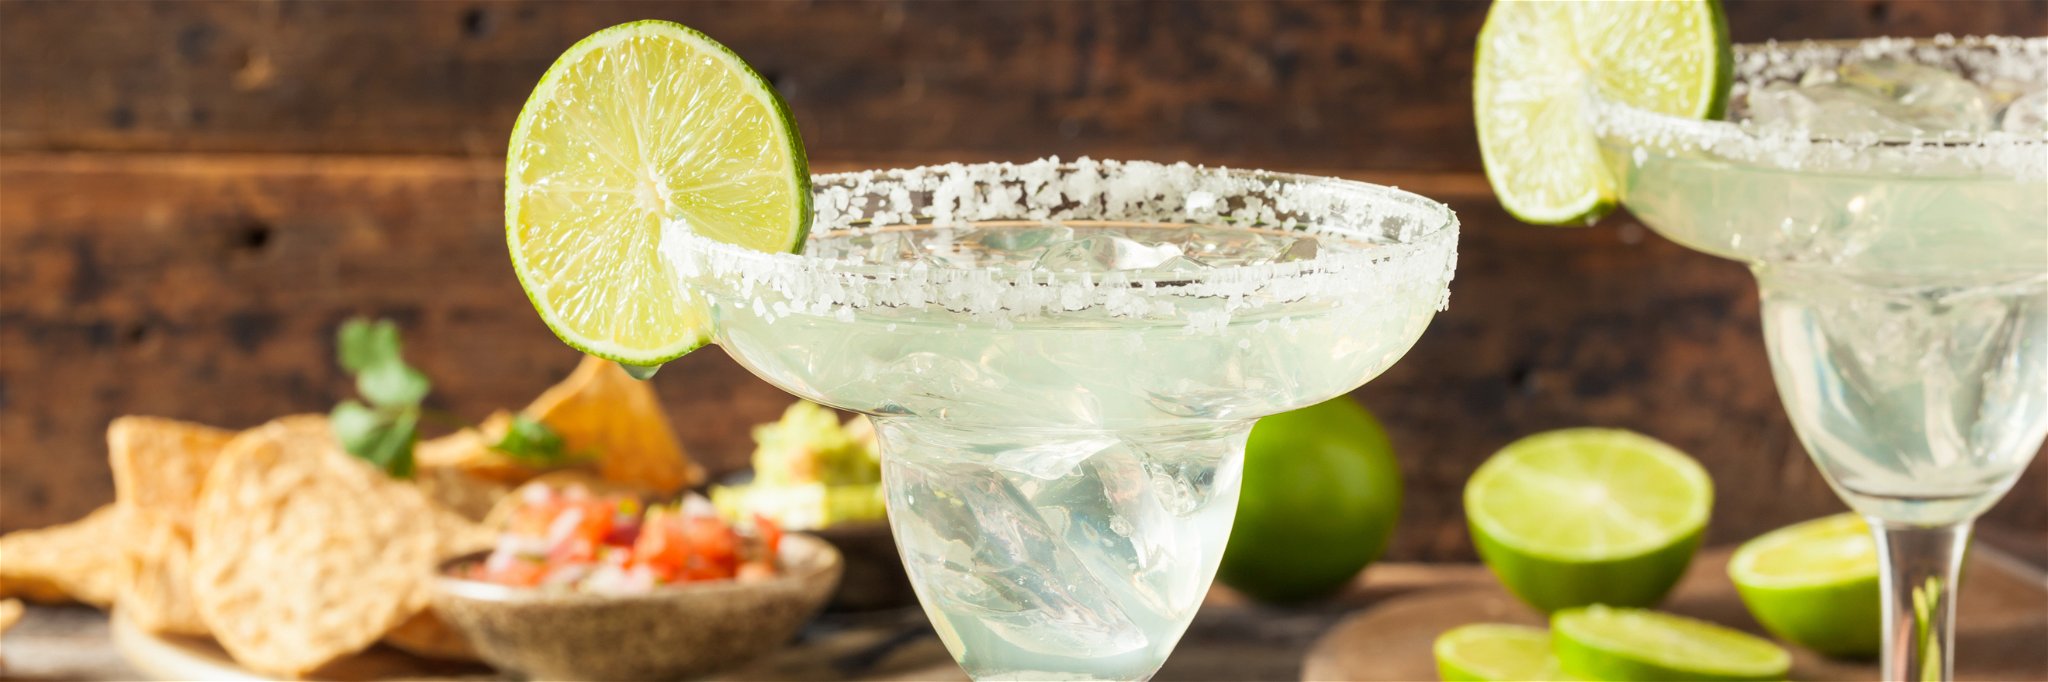 24 July is National&nbsp;Tequila Day&nbsp;